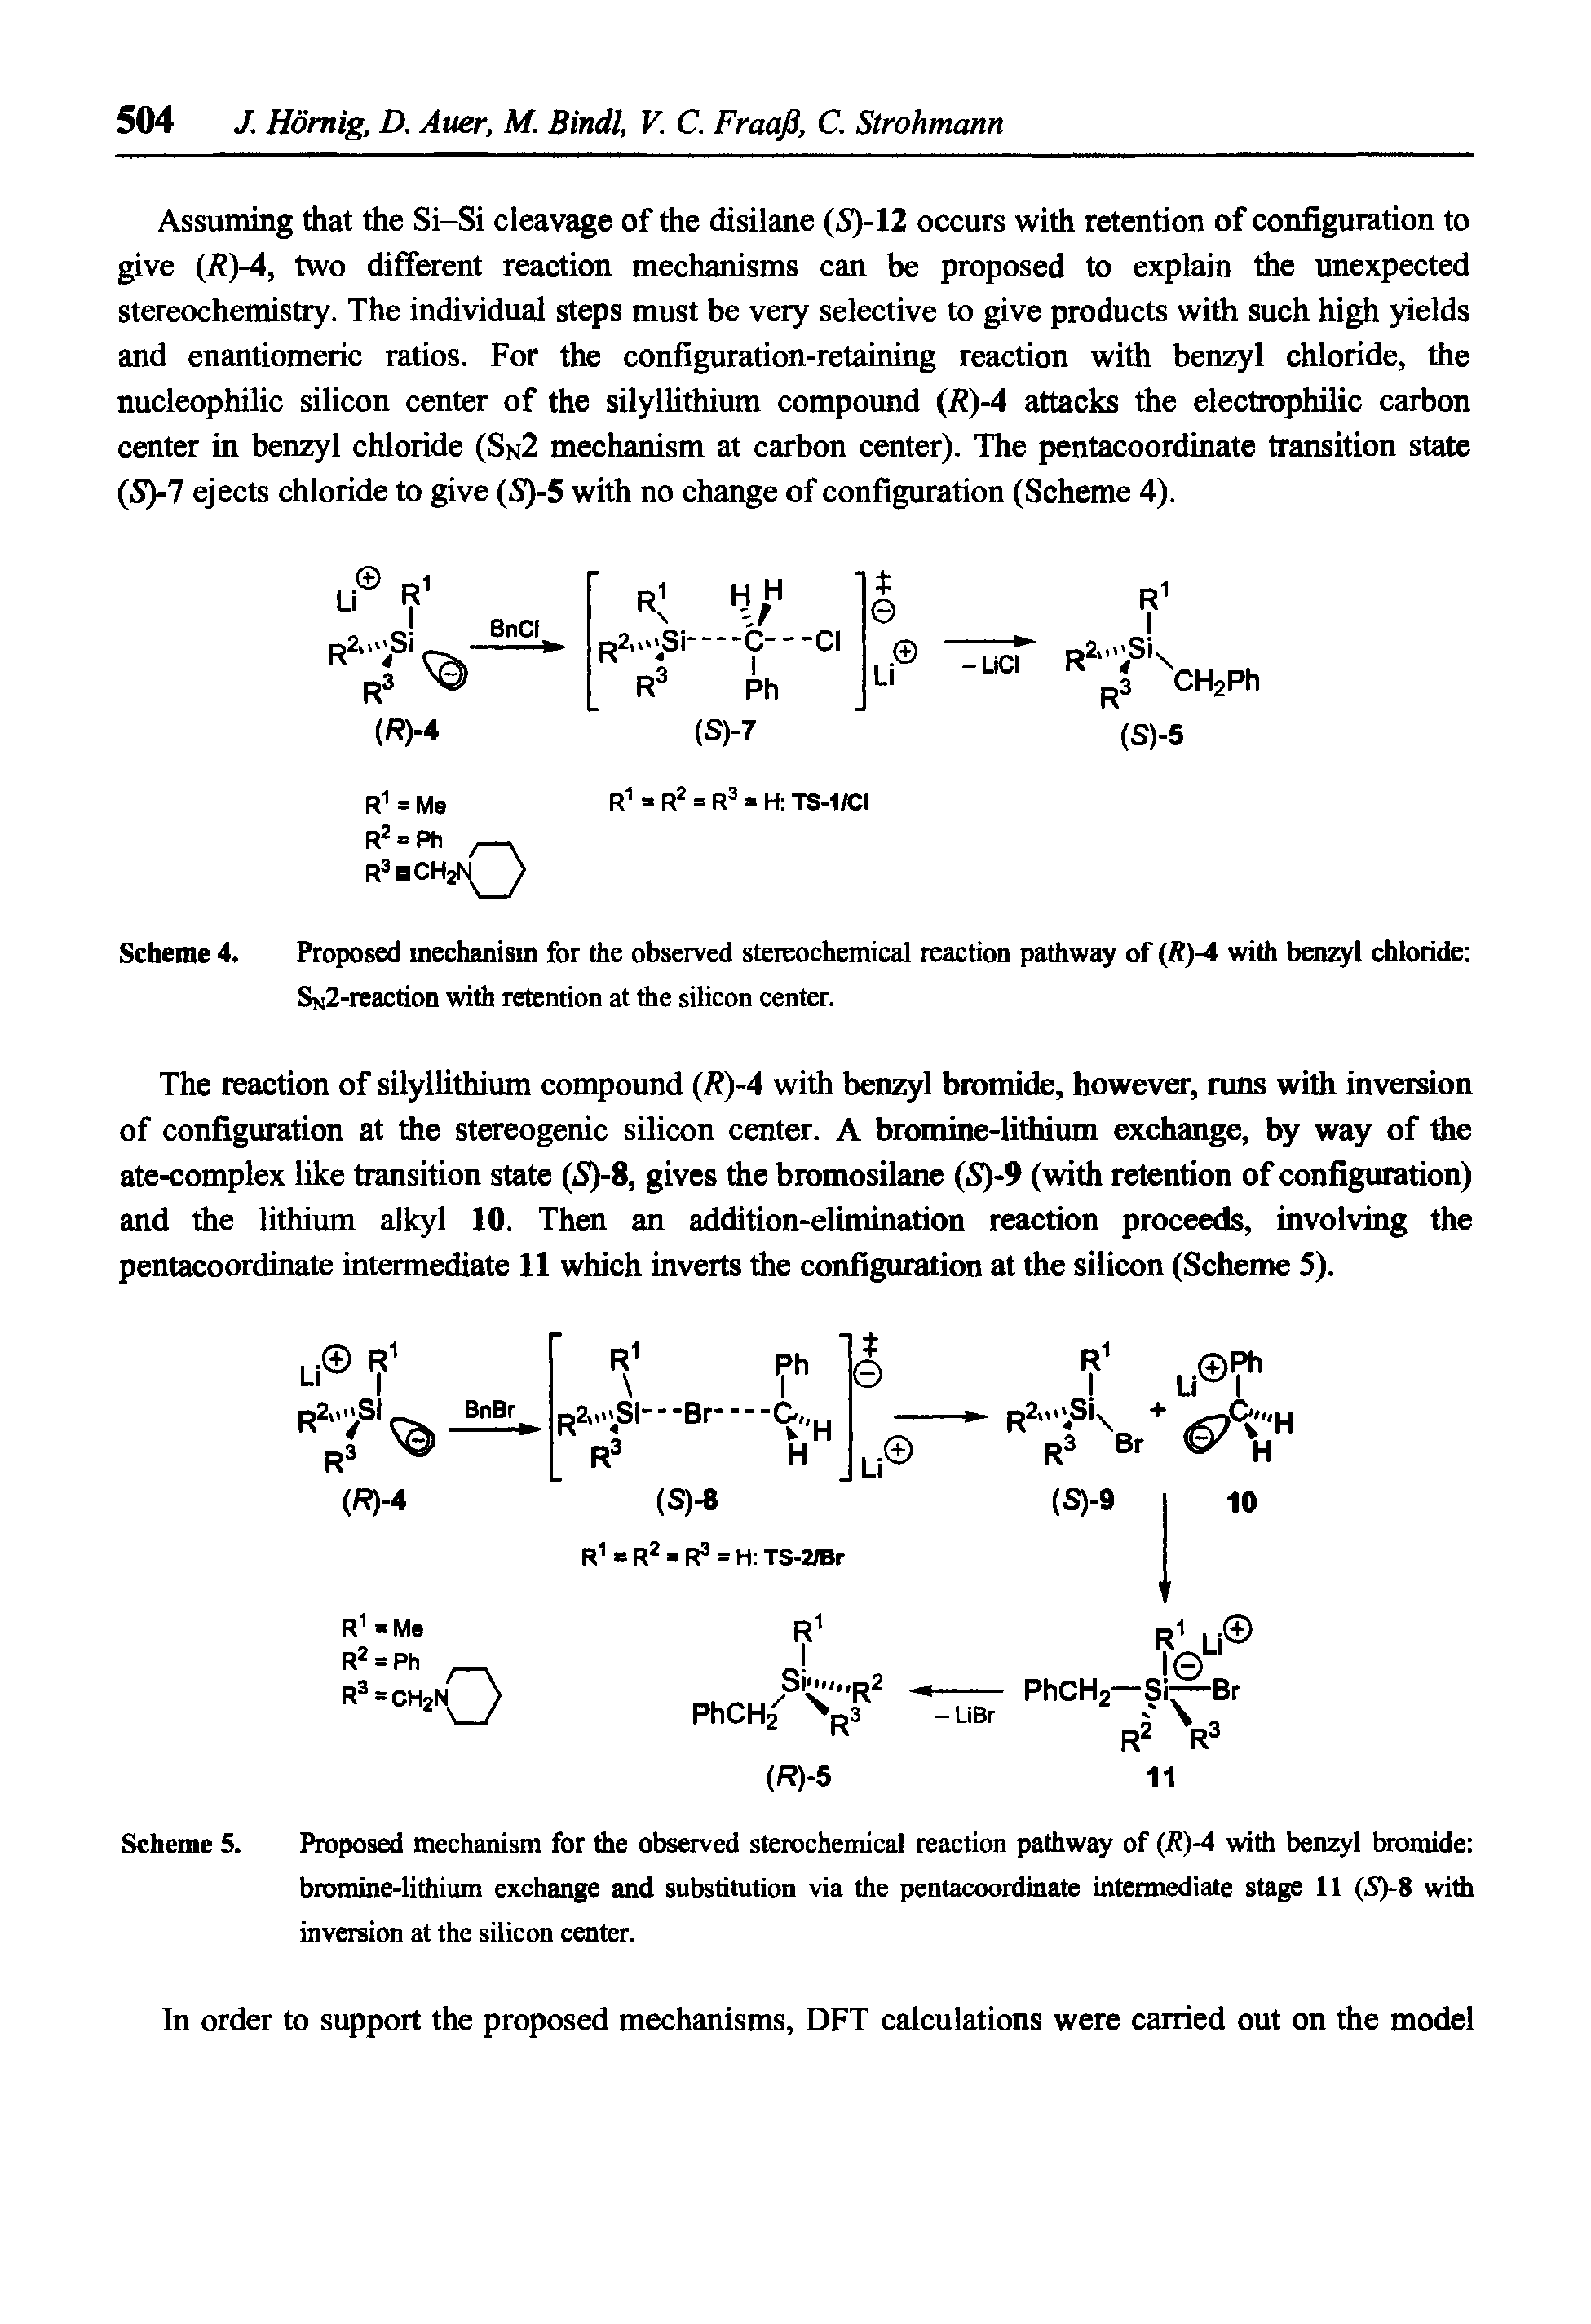 Scheme 4. Proposed mechanism for the observed stereochemical reaction pathway of (A)-4 with benzyl chloride SN2-reaction with retention at the silicon center.